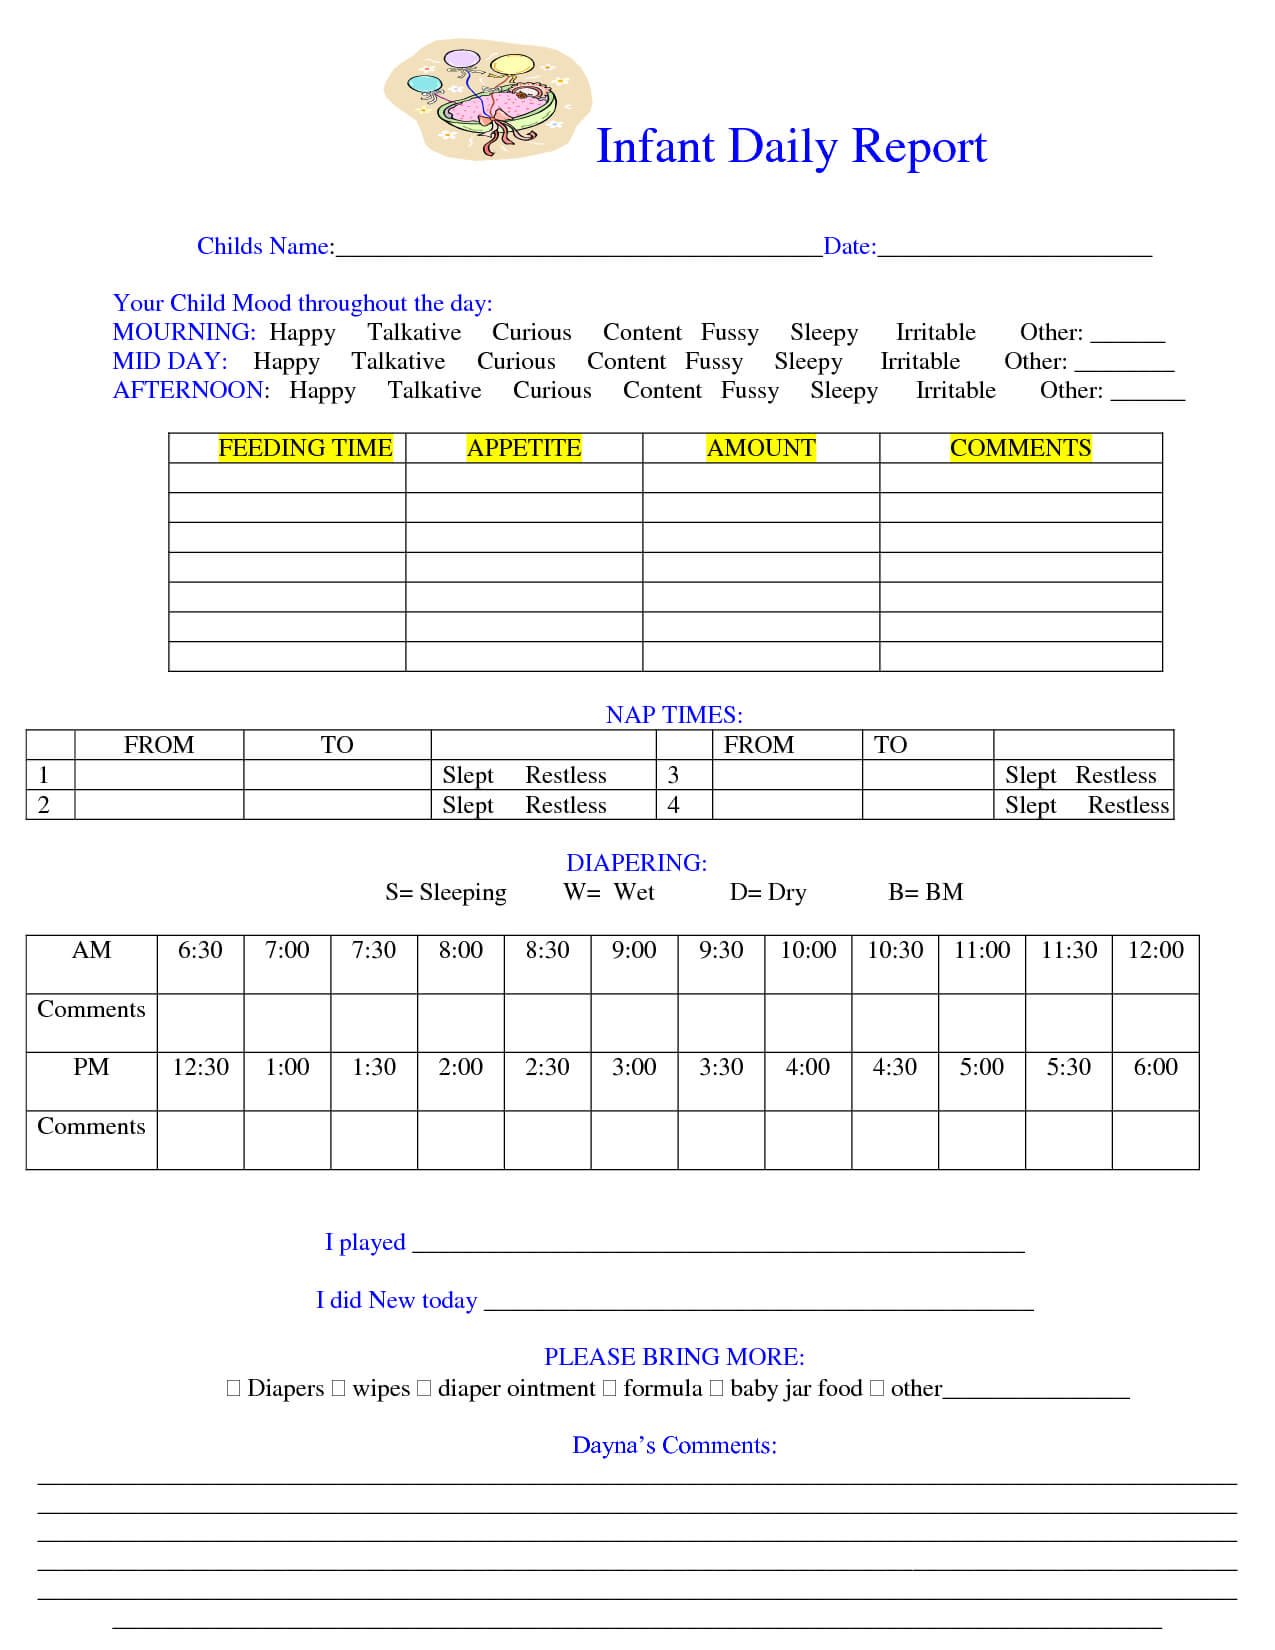 Baby Daily Sheet | Infant Daily Report – Download As Doc With Daycare Infant Daily Report Template